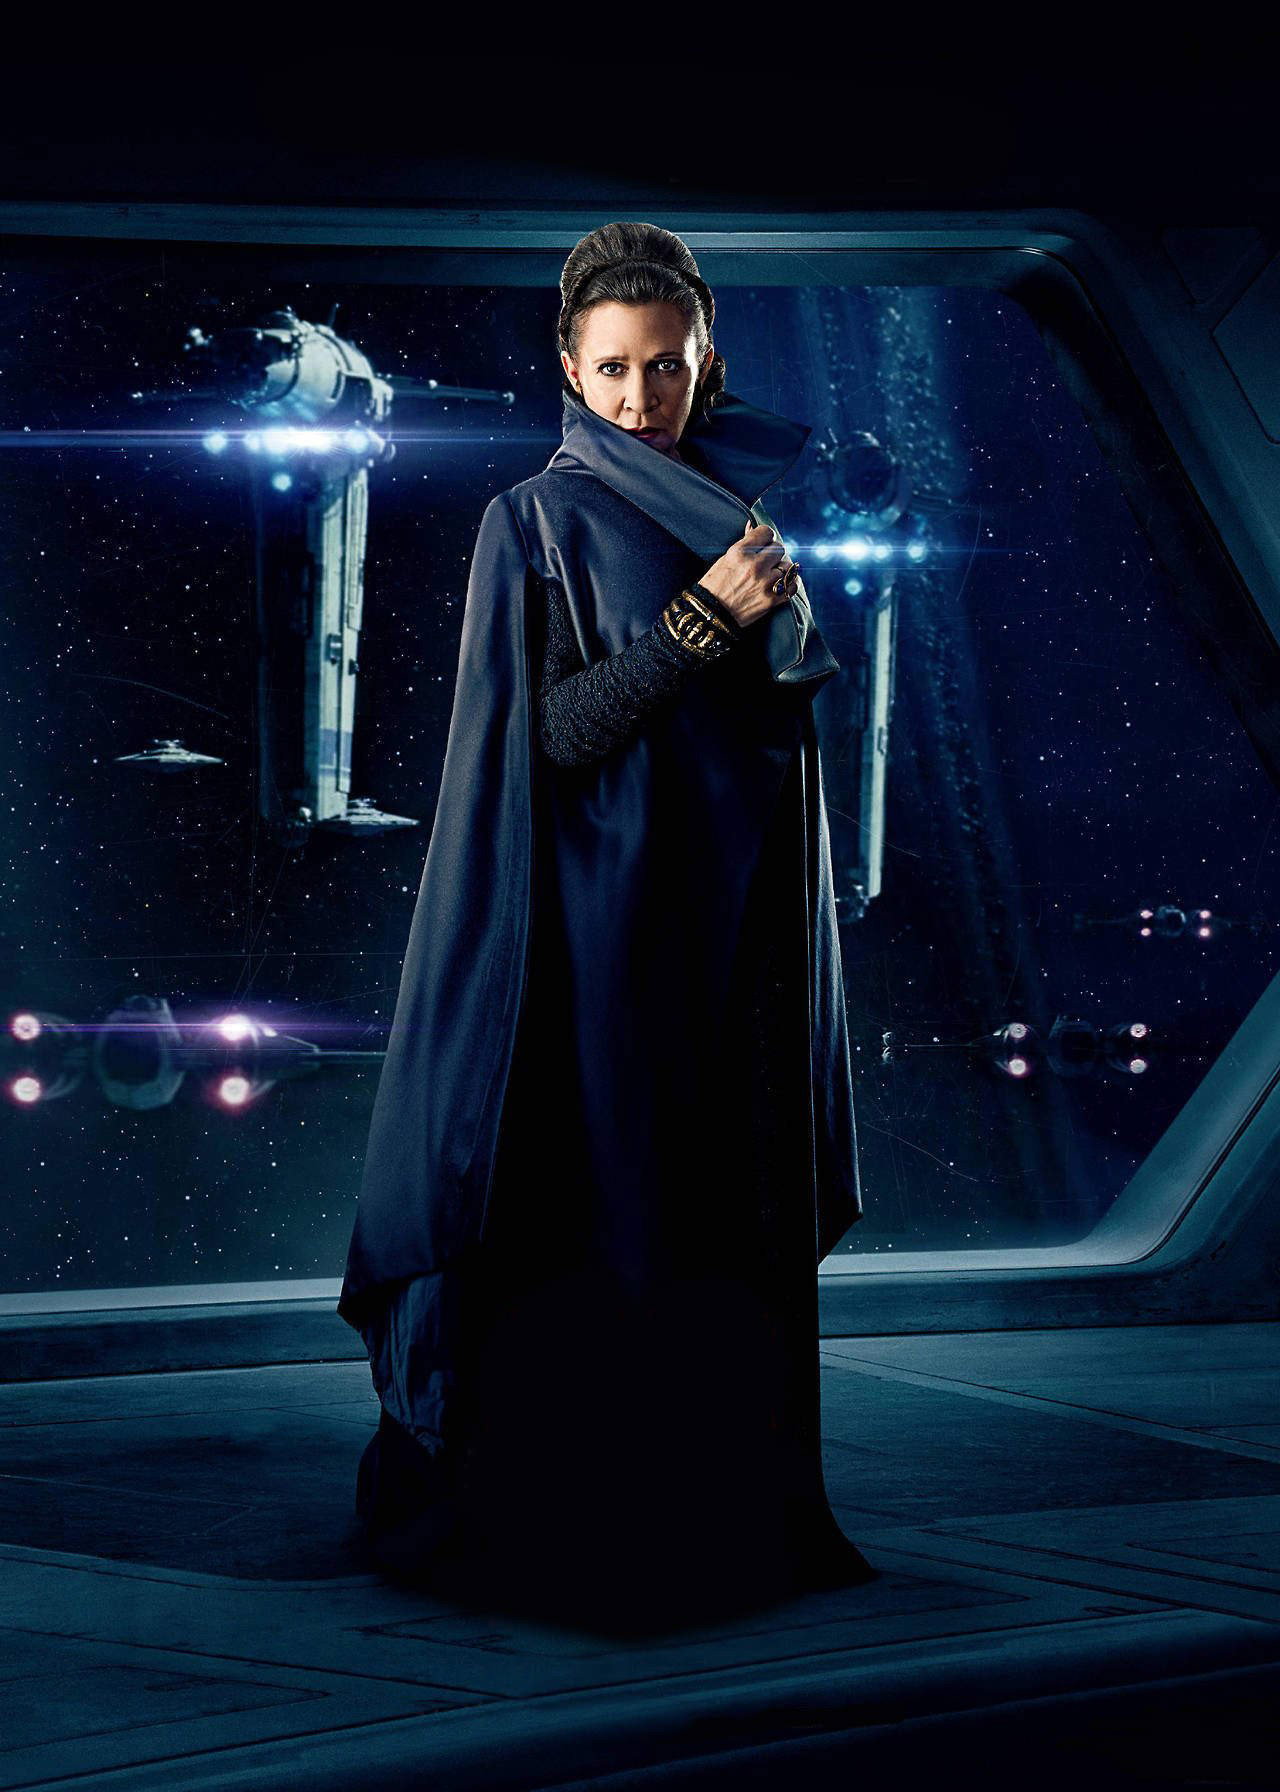 Photo by the5impleton with the username @the5impleton, who is a verified user,  December 11, 2017 at 1:58 PM and the text says 'cidraman:

Textless Chinese Character Posters. #star  #wars  #the  #last  #jedi  #lucasfilm  #luke  #skywalker  #leia  #organa  #re  #kylo  #ren  #poe  #dameron  #bb8  #bb-8  #mark  #hamill  #carrie  #fisher  #daisy  #ridley  #adam  #driver  #oscar..'